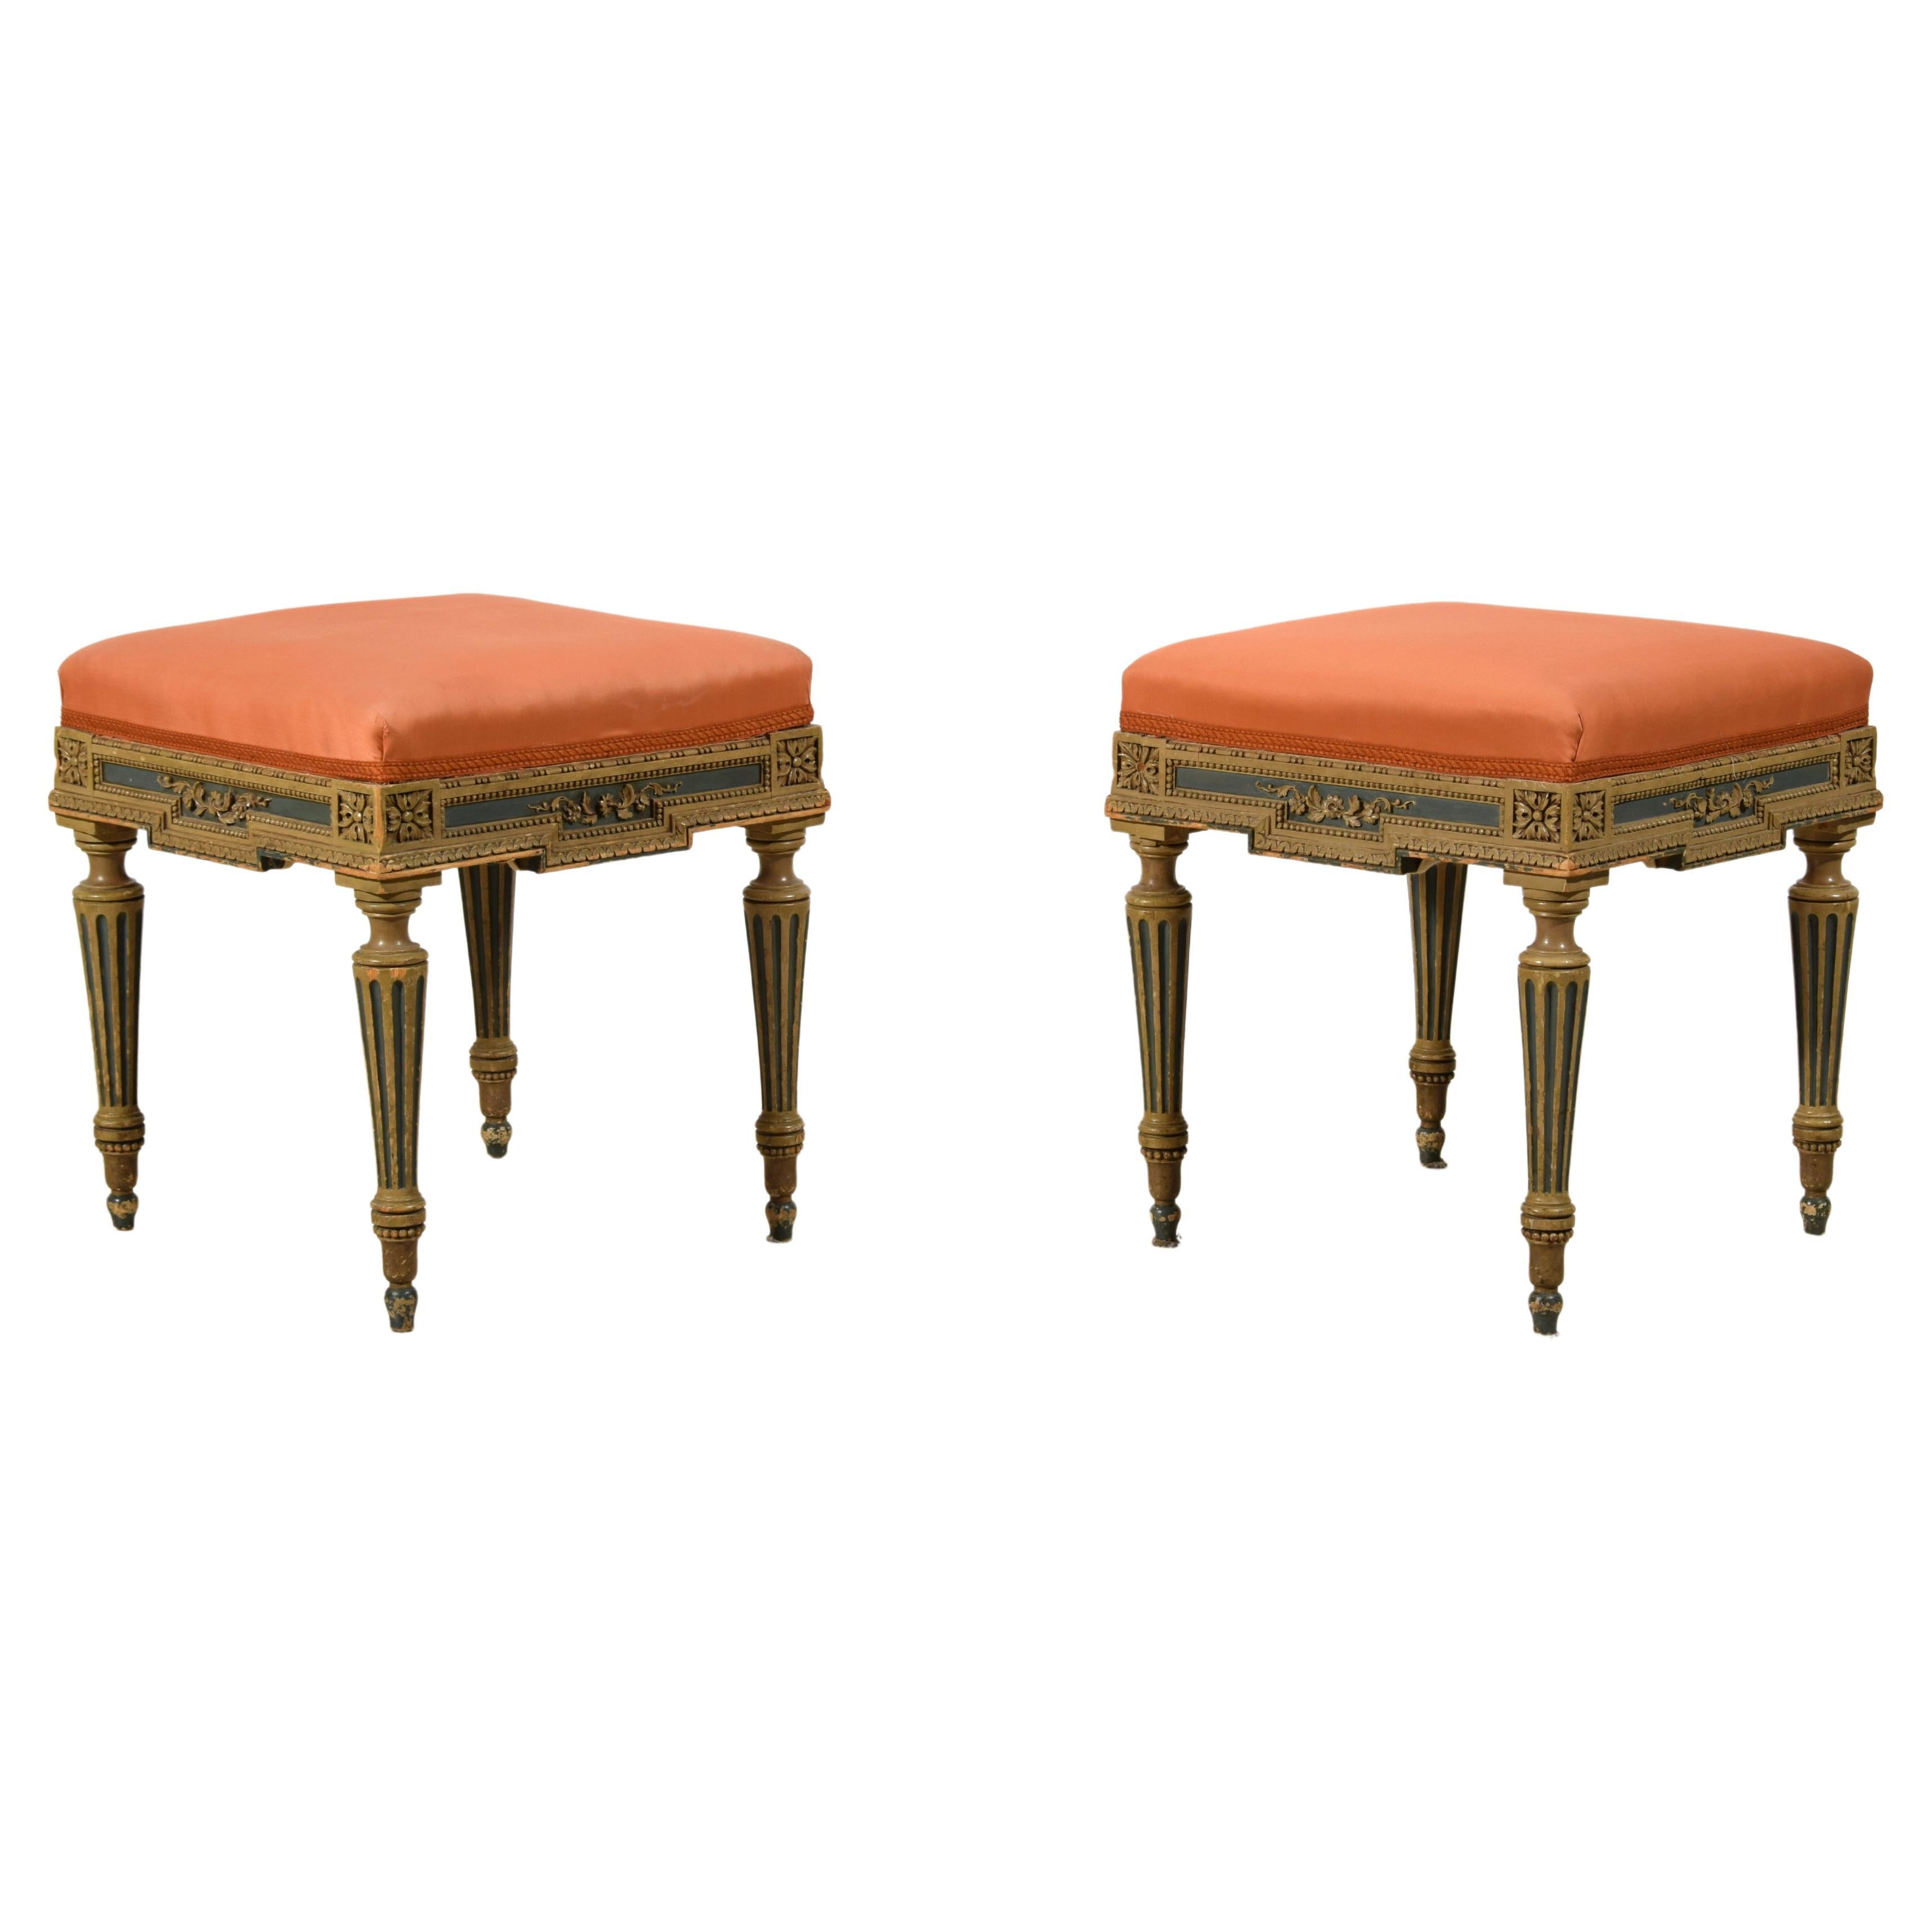 XXth Century, Pair of Italian Neoclassical Style Lacquered Wood Stools